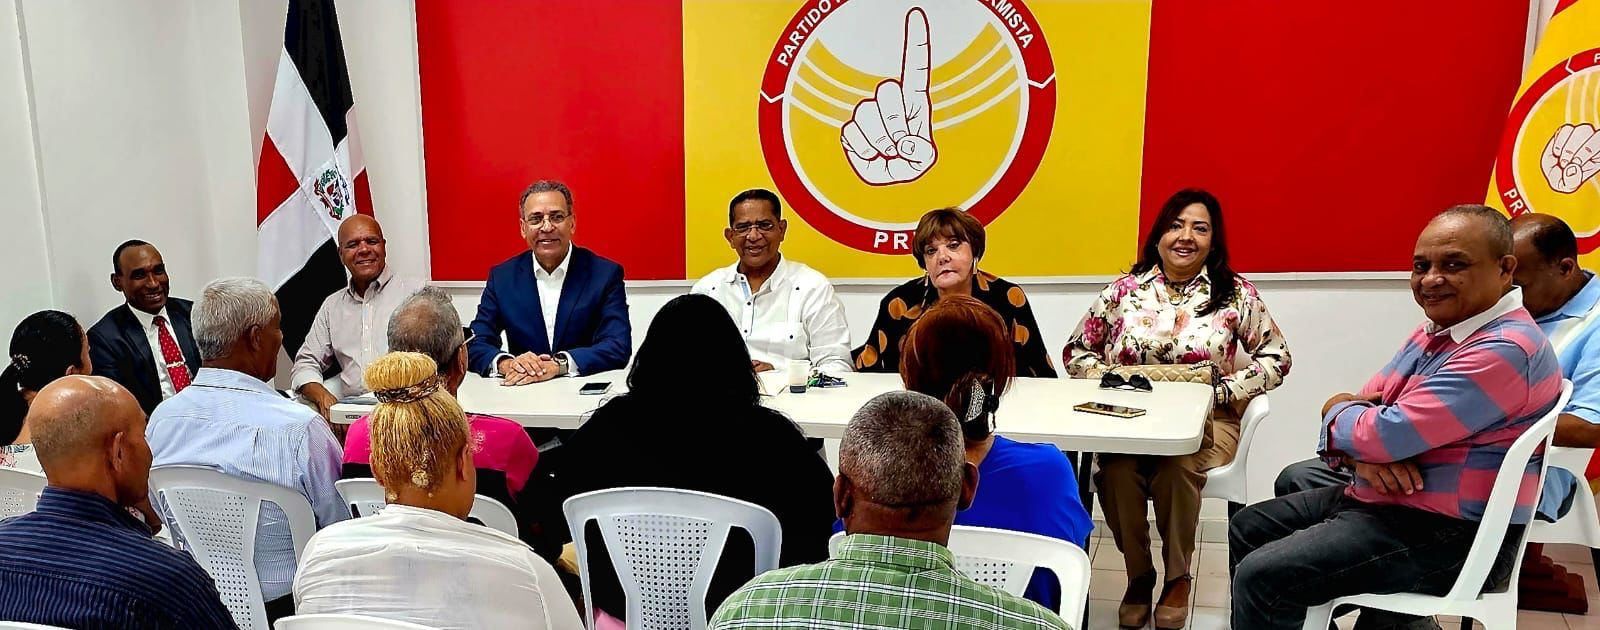 The new reformist group decided to participate in the election as an ally  AlMomento.net